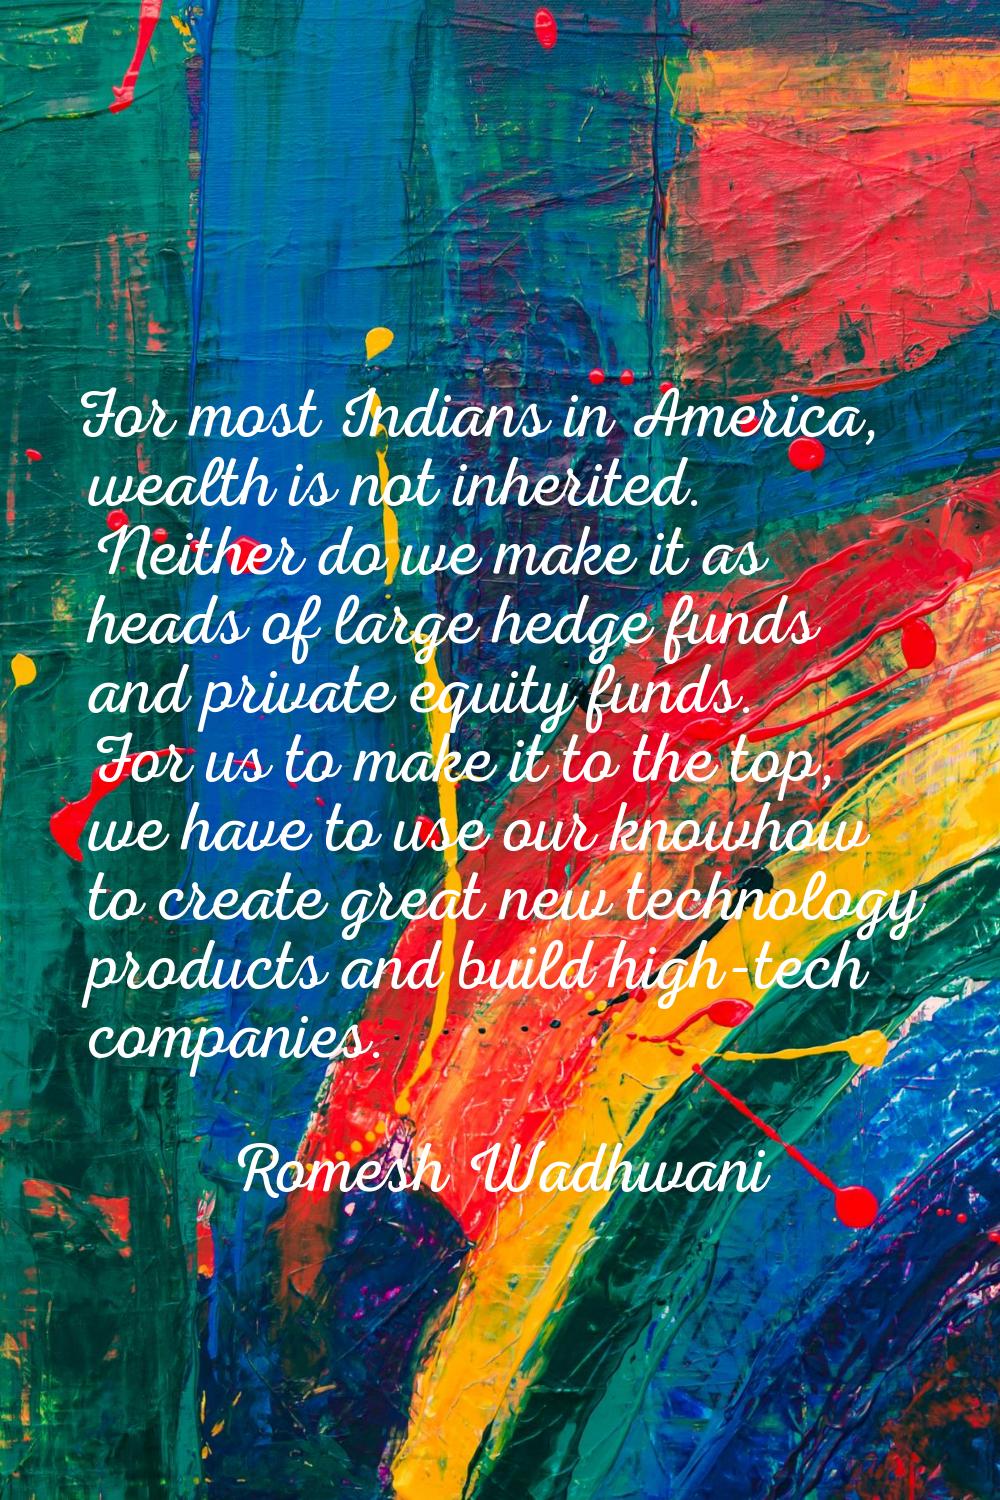 For most Indians in America, wealth is not inherited. Neither do we make it as heads of large hedge